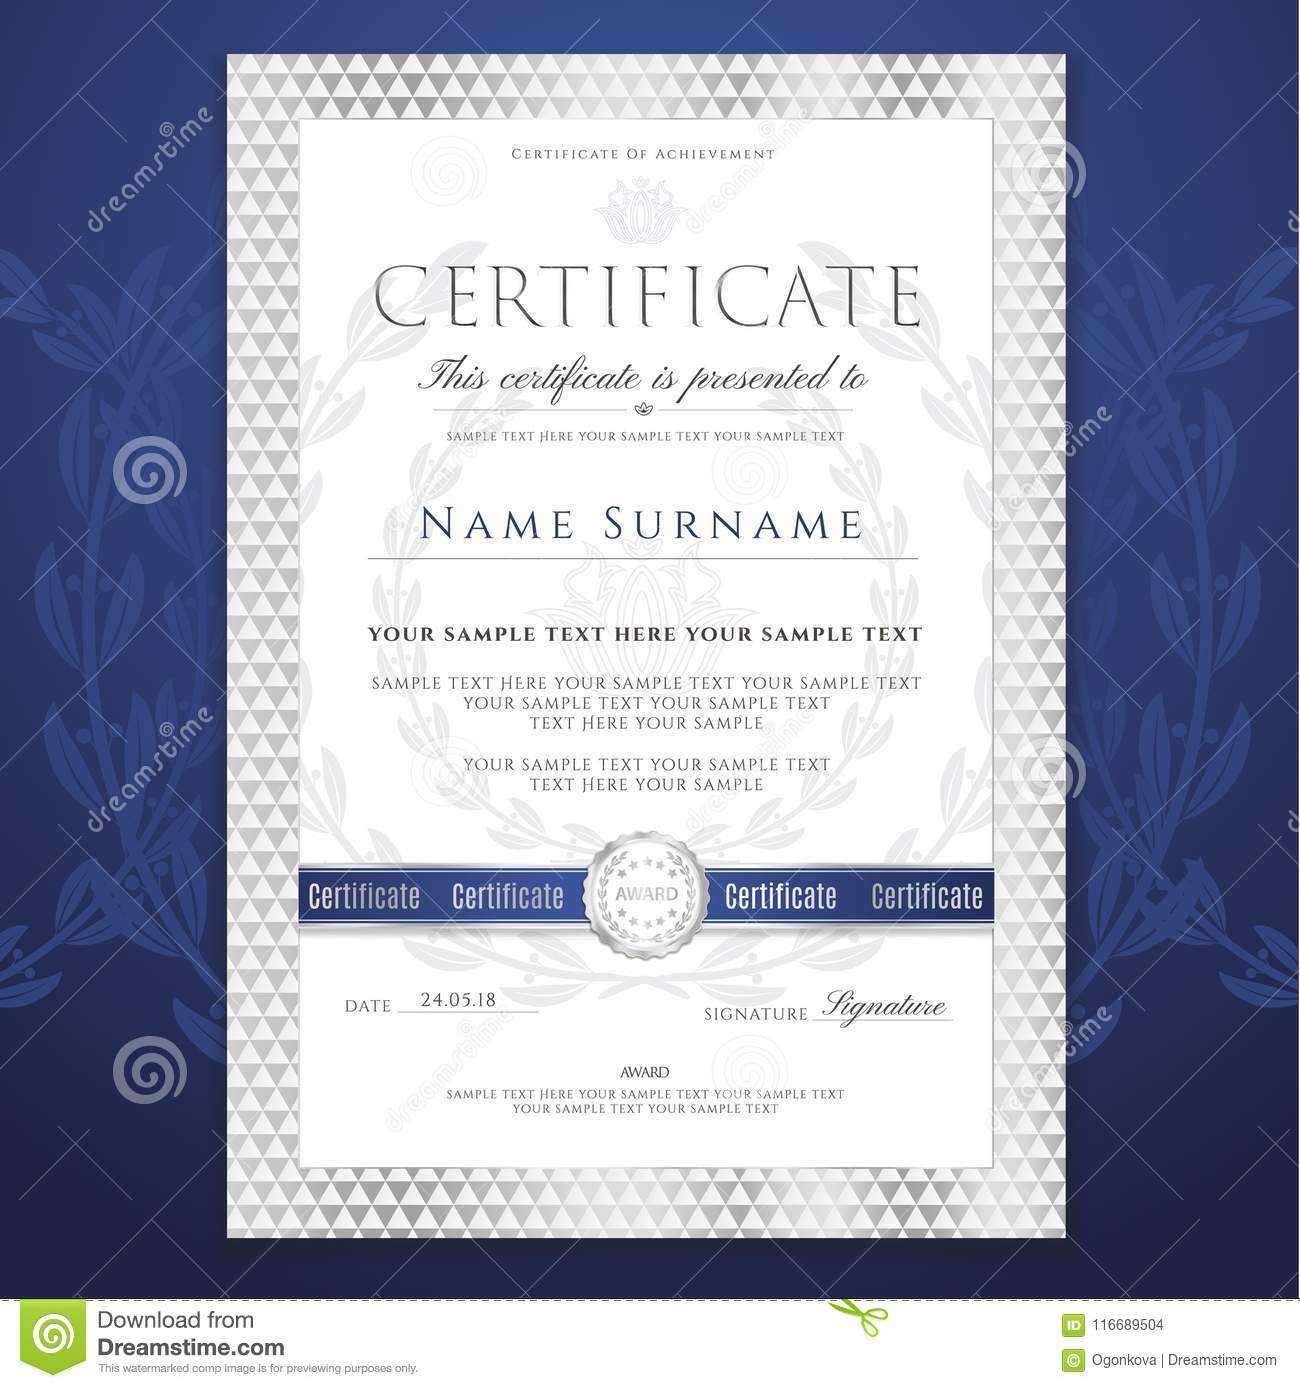 Certificate Template. Printable / Editable Design For Intended For Free Printable Graduation Certificate Templates